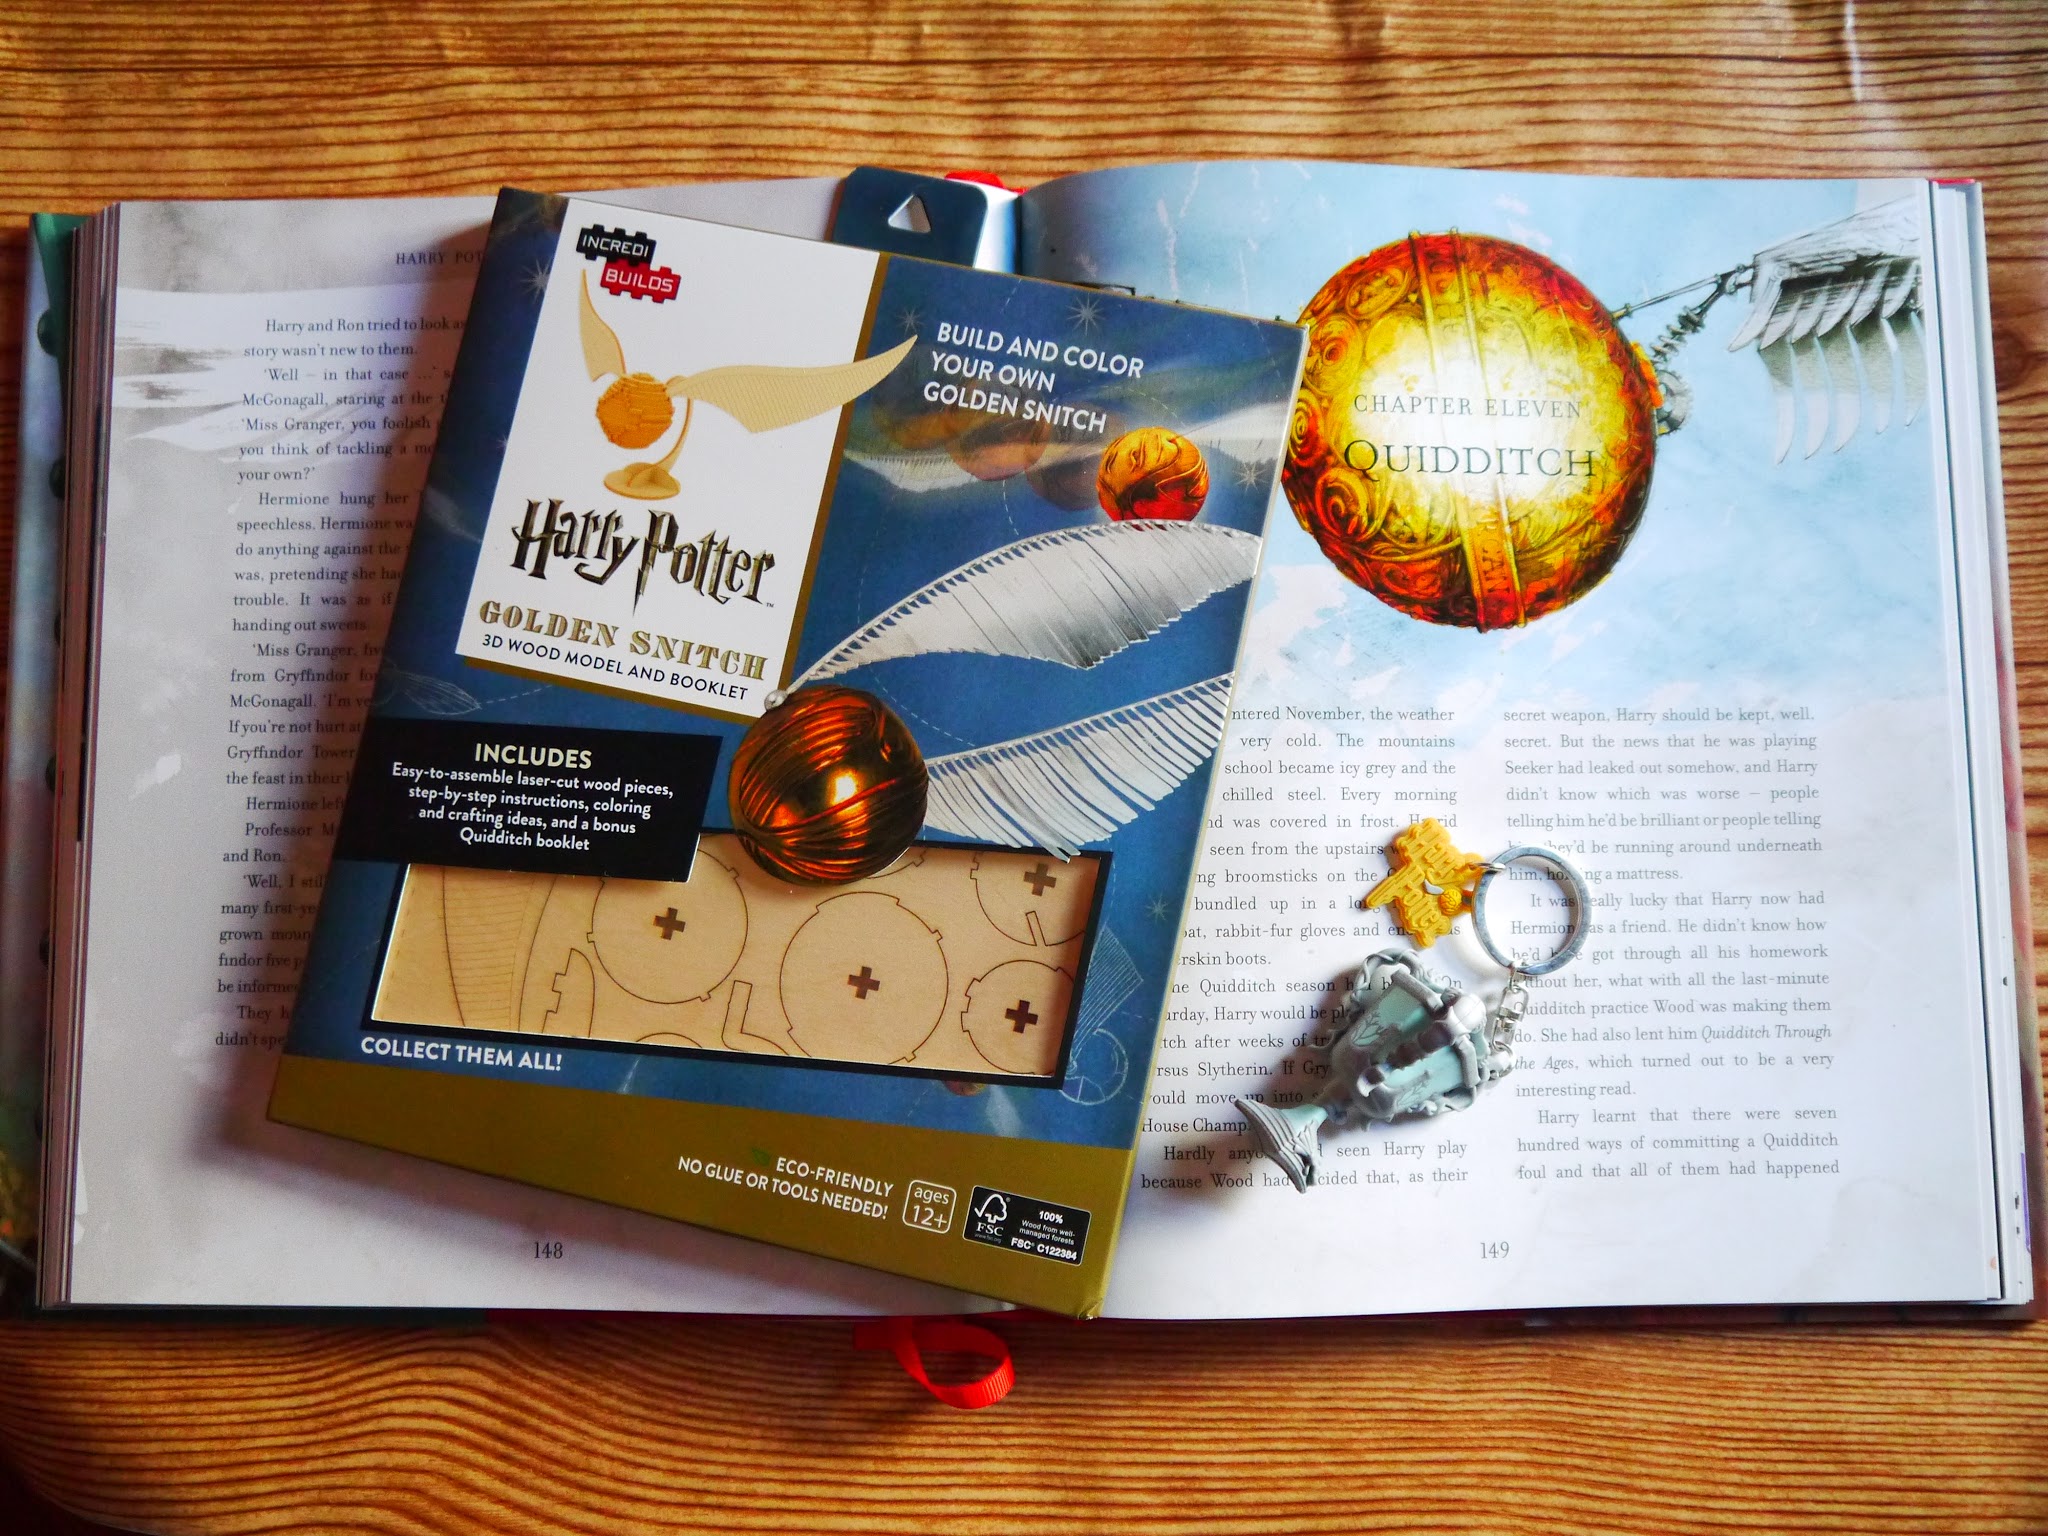 Behind the scenes: Designing the Golden Snitch